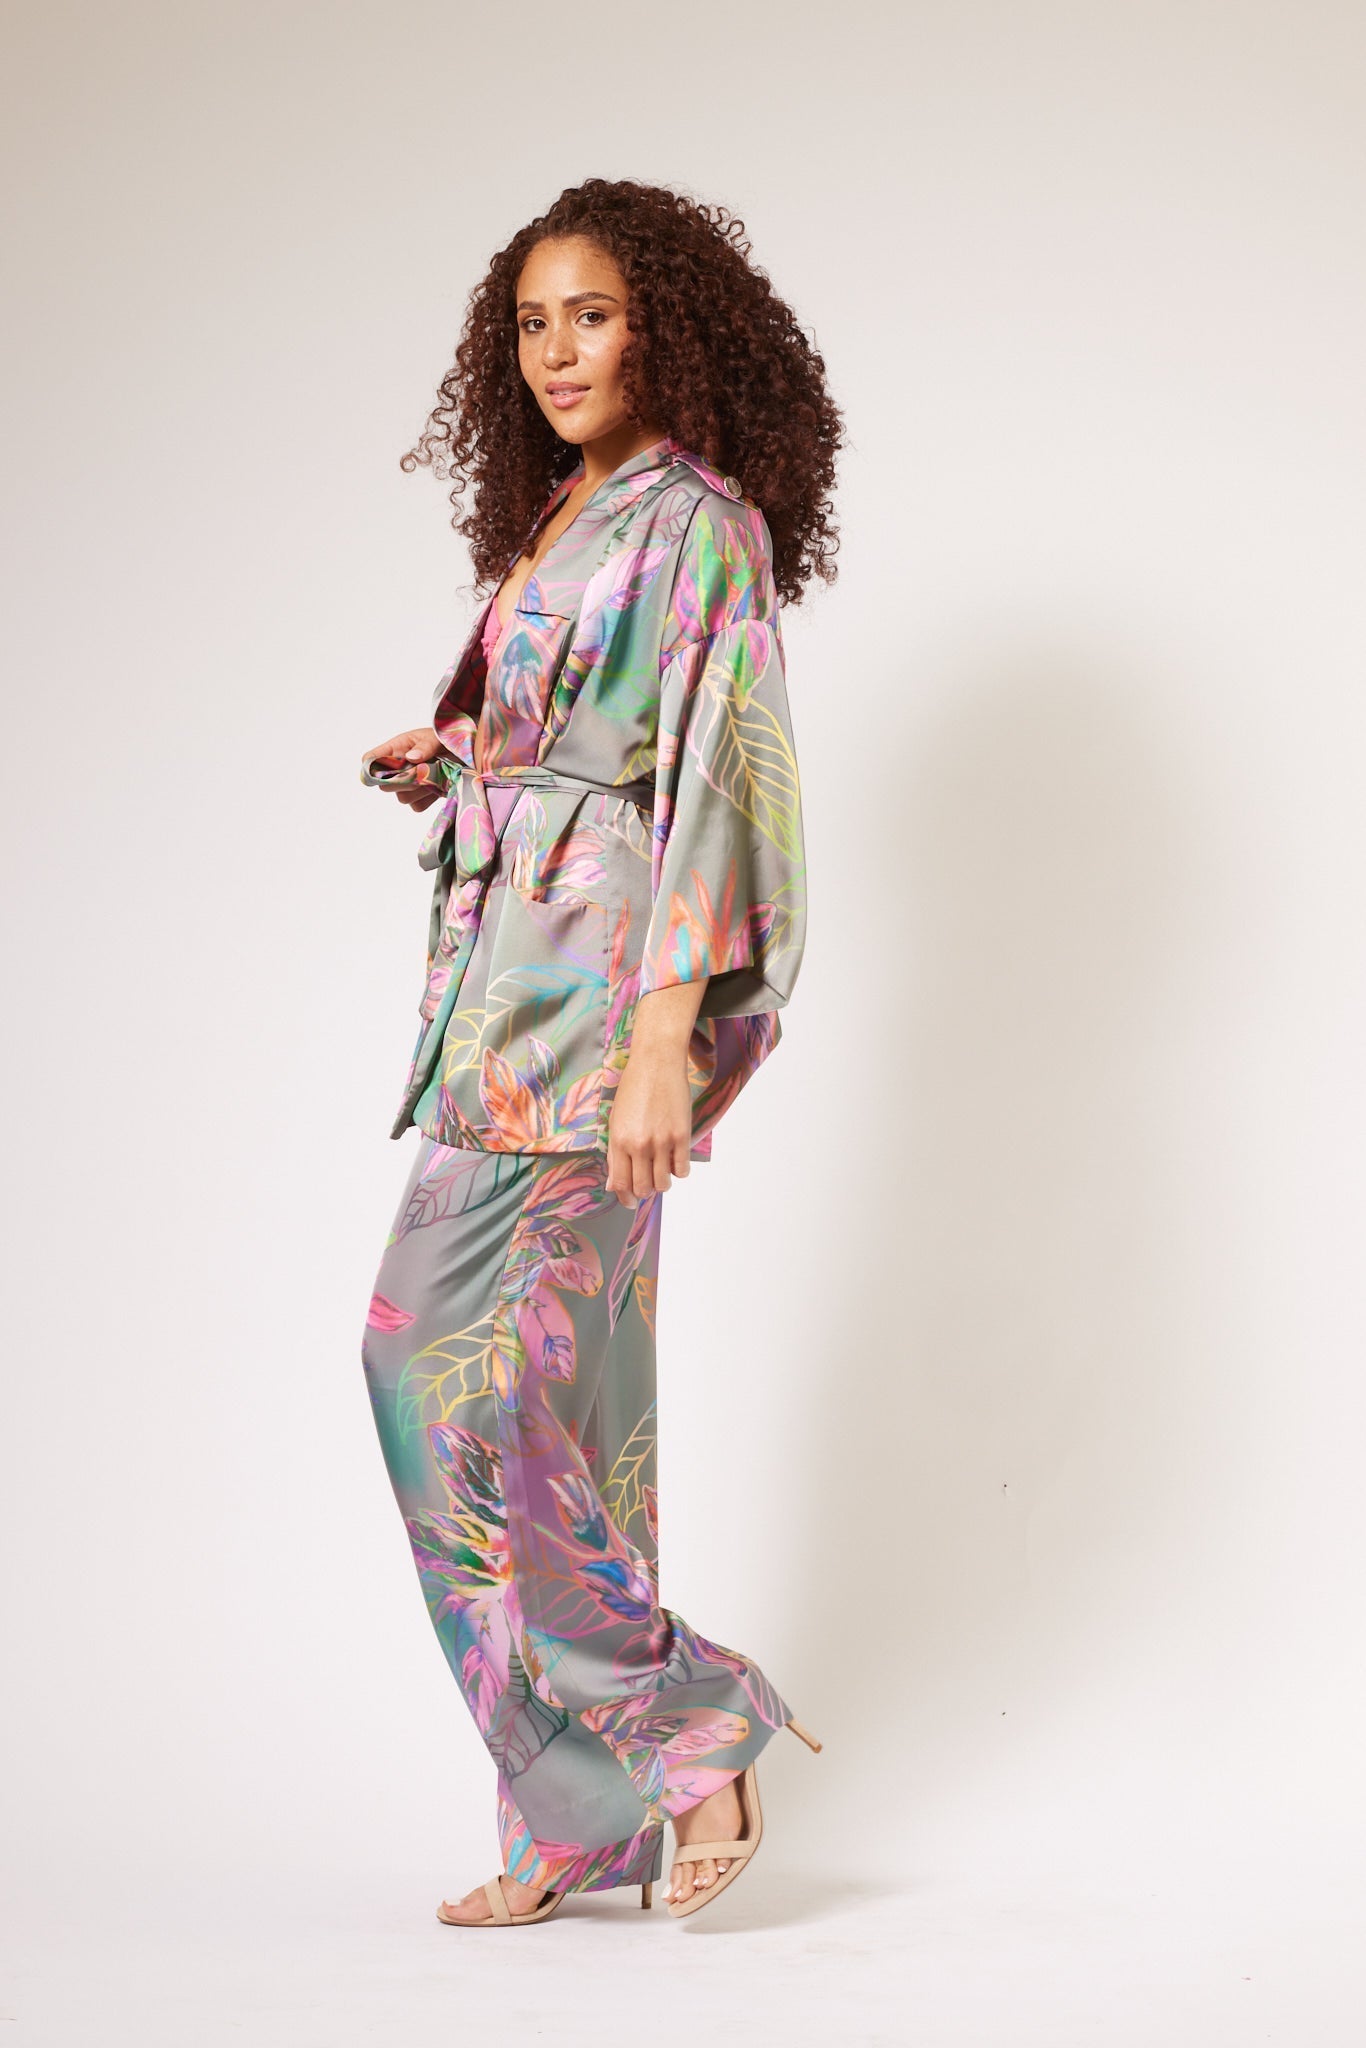 side profile of woman modelling all over multicolored tropical print kimono duster and matching yacht slacks made with recycled textiles